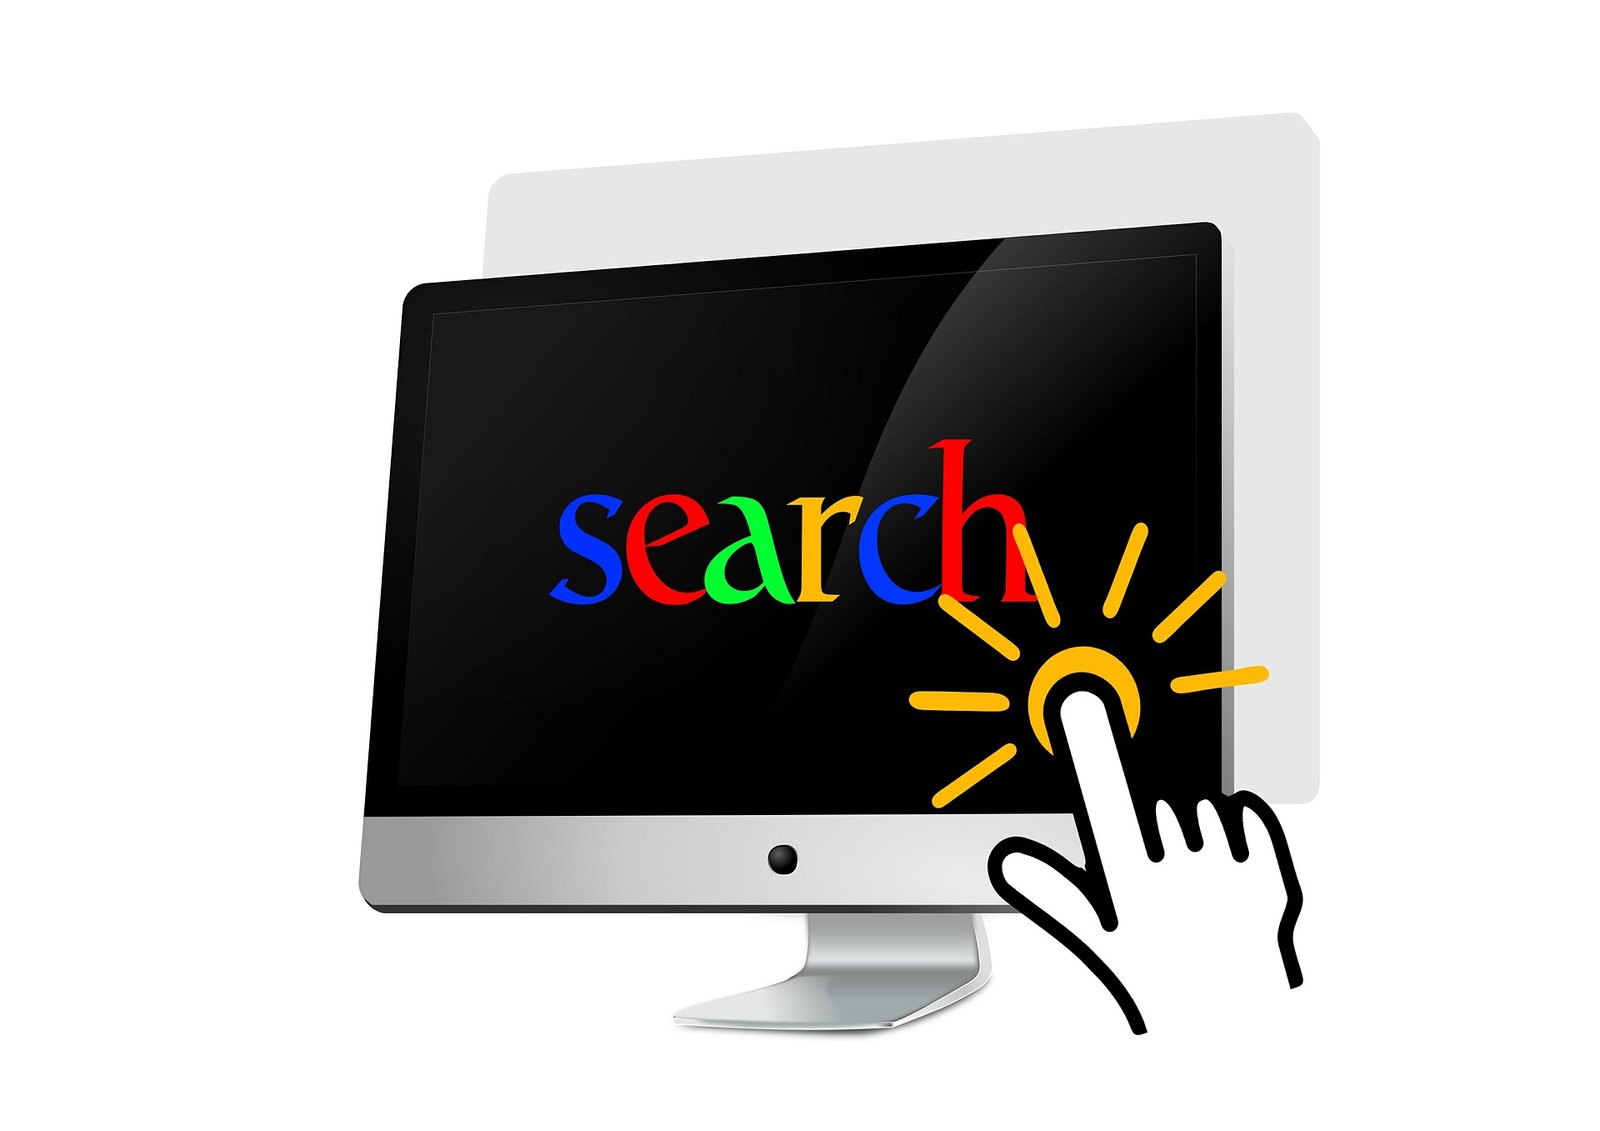 Search Engines - SEO vs SEM: the difference